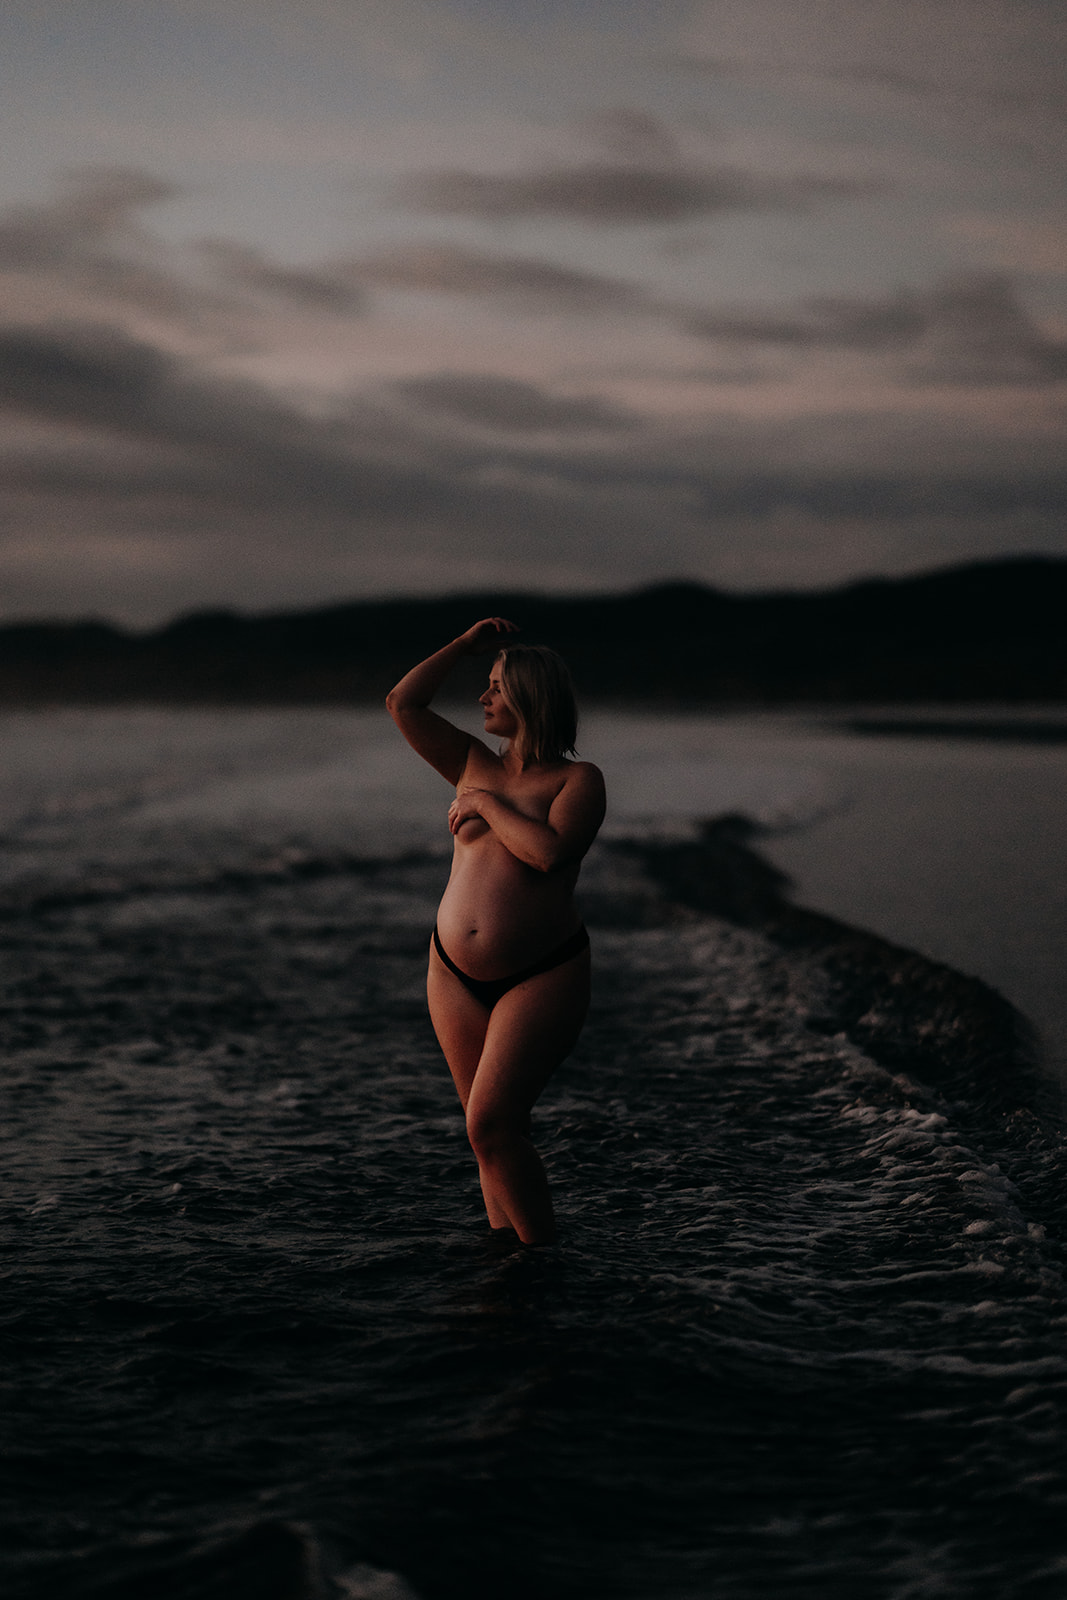 Maternity photograph of a woman during a raglan maternity photoshoot by waikato photographer haley adele photography